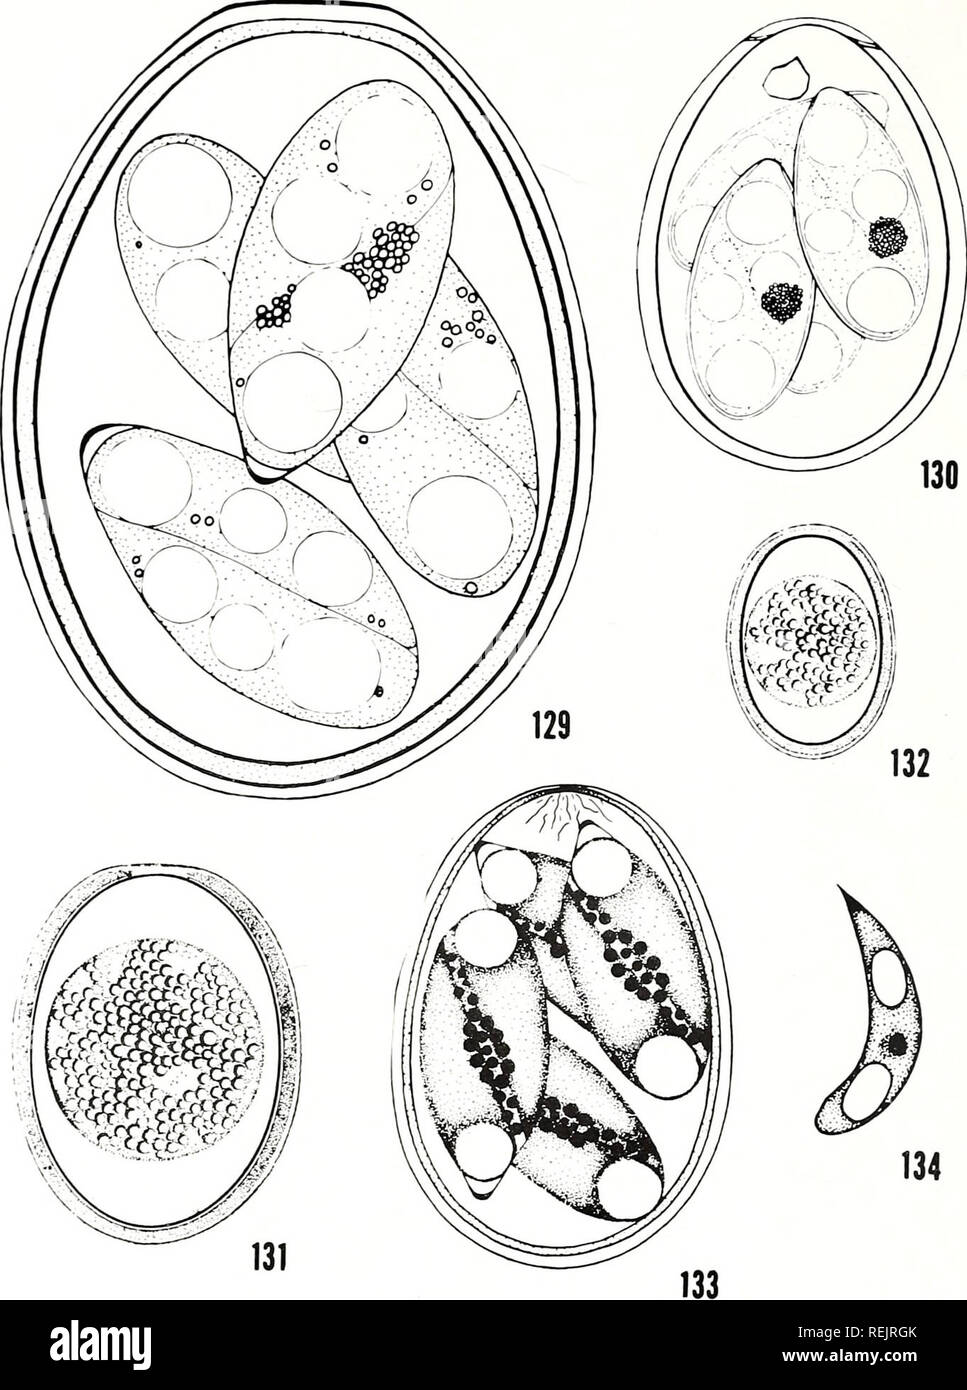 The Coccidian Parasites Protozoa Sporozoa Of Ruminants Coccidia Ruminants 280 Plate 30 Figs 129 131 E Canadensis Bruce 1921 From Bos Taunts Fig 129 Oocyst From Levine And Ivens 1967 X 2592